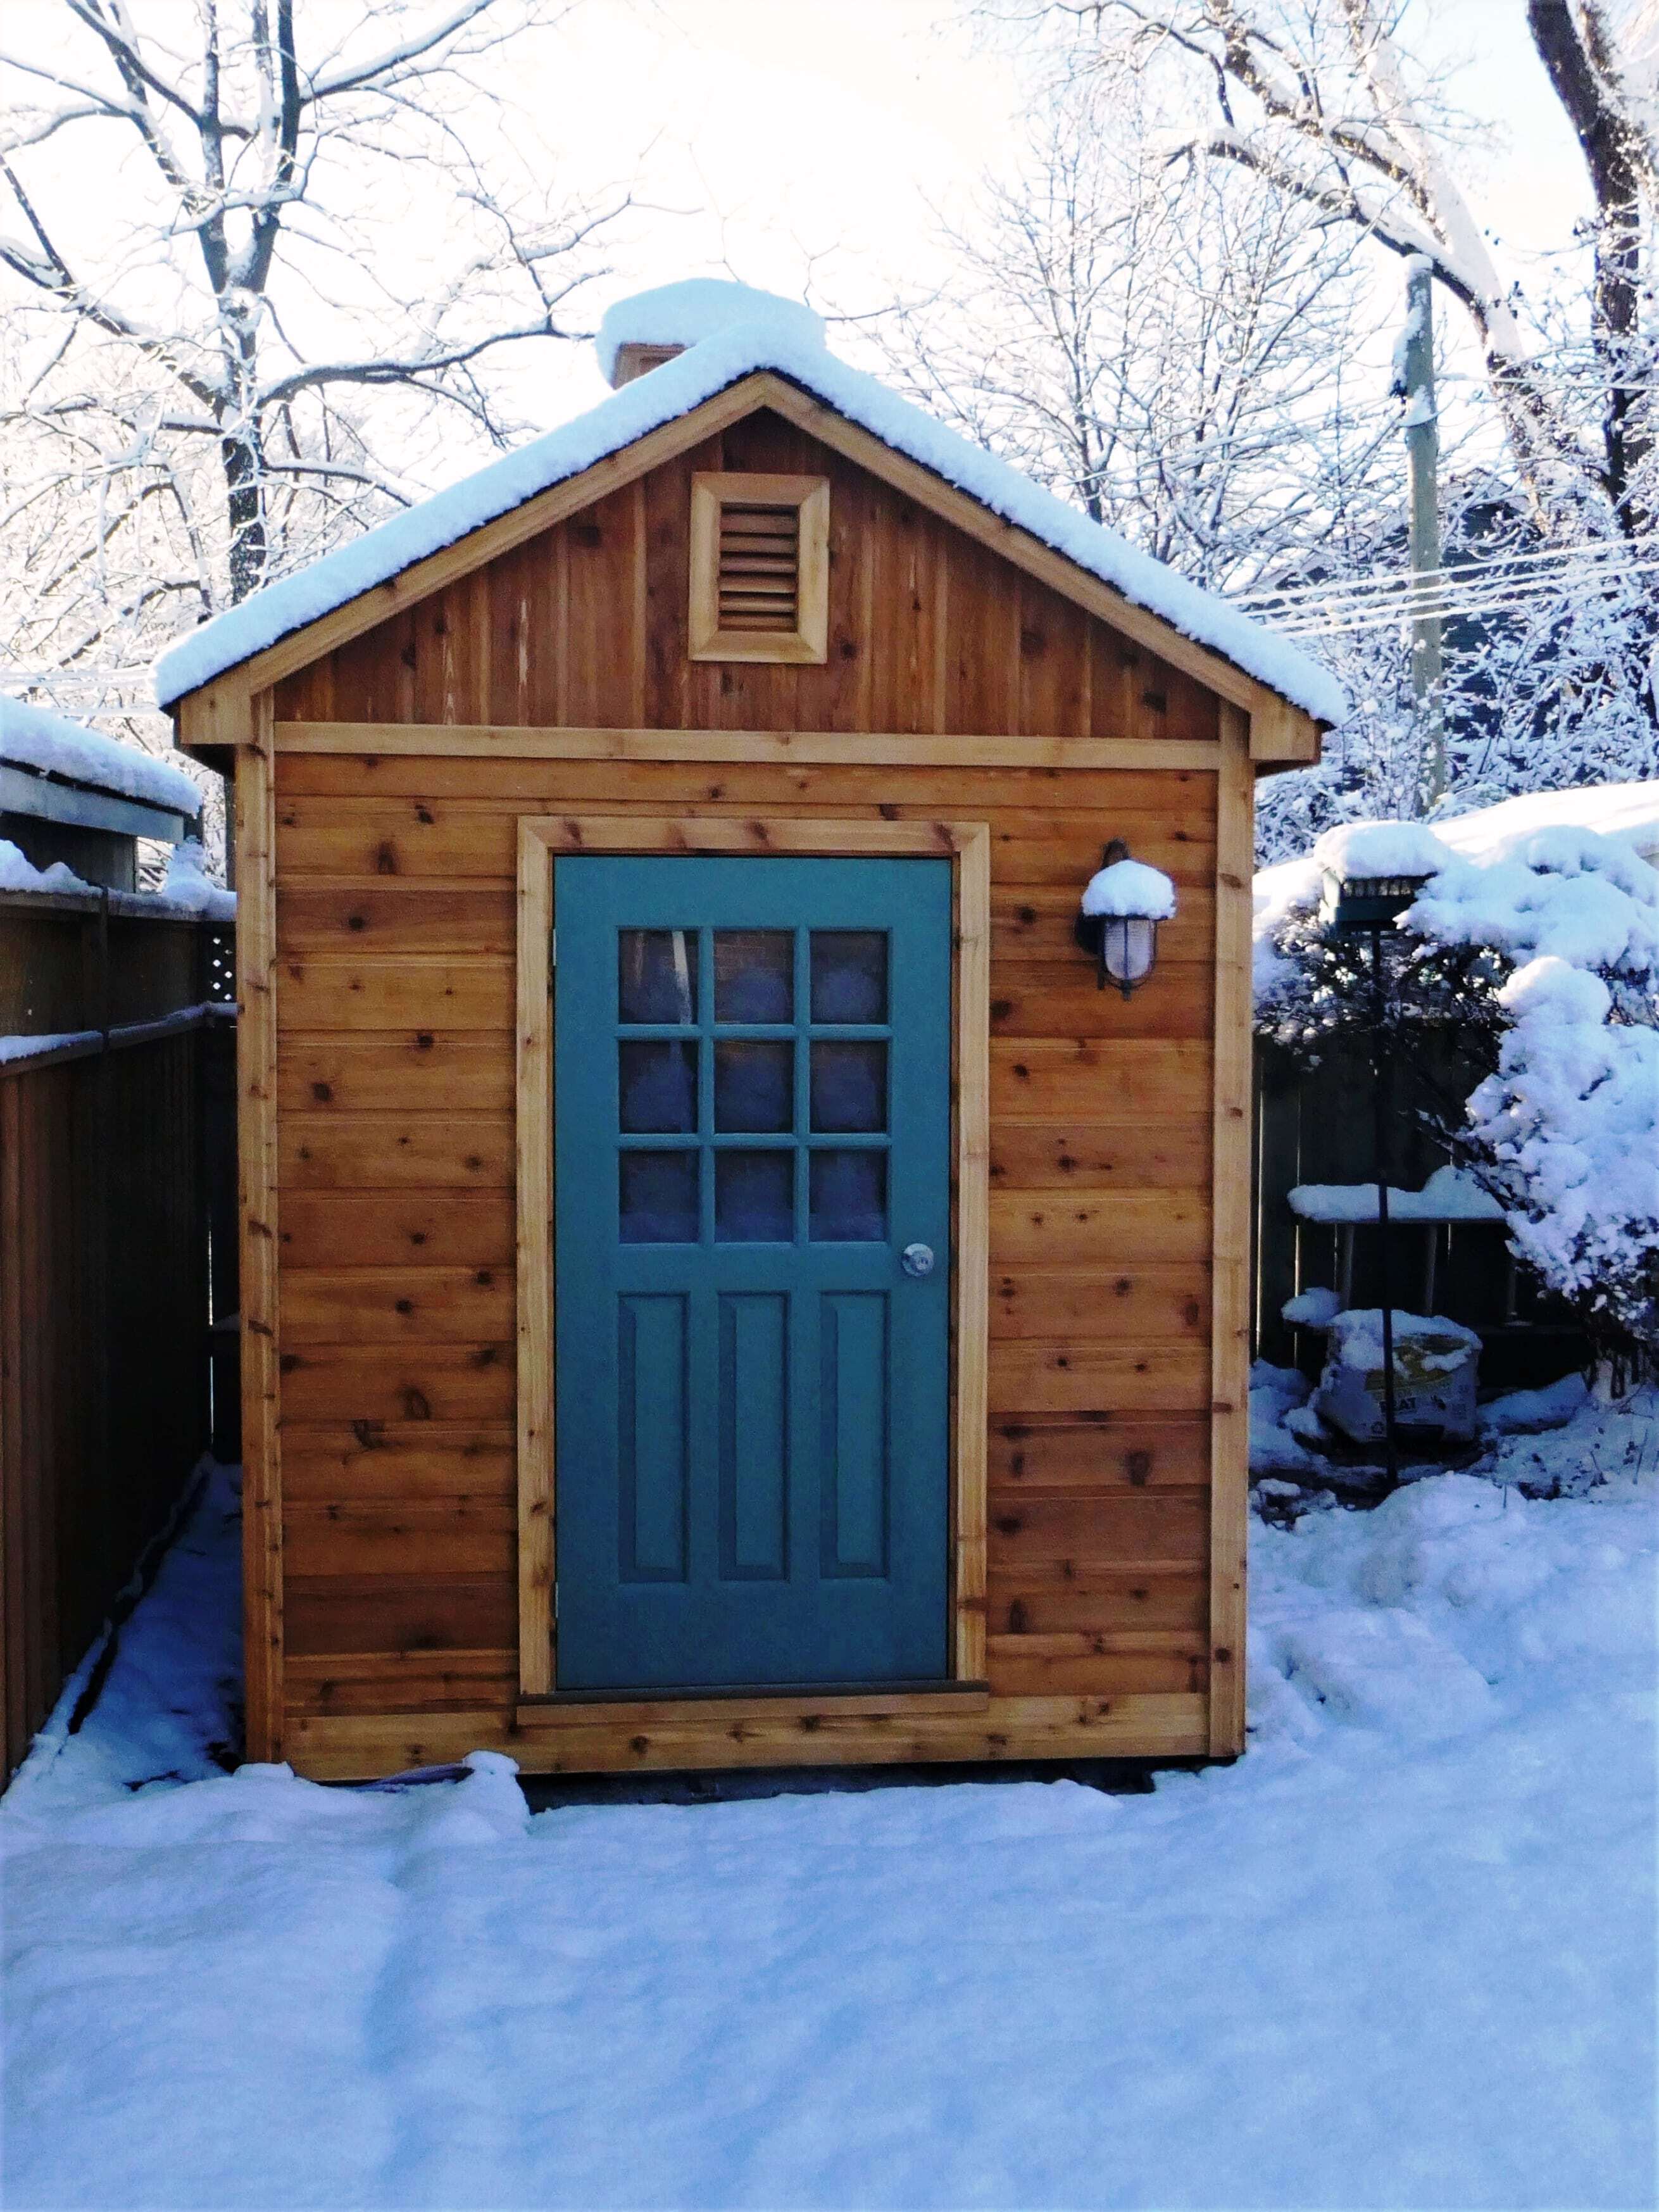 Front view of 7 ’x 9' Palmerston Garden Shed located in Etobicoke, Ontario – Summerwood Products